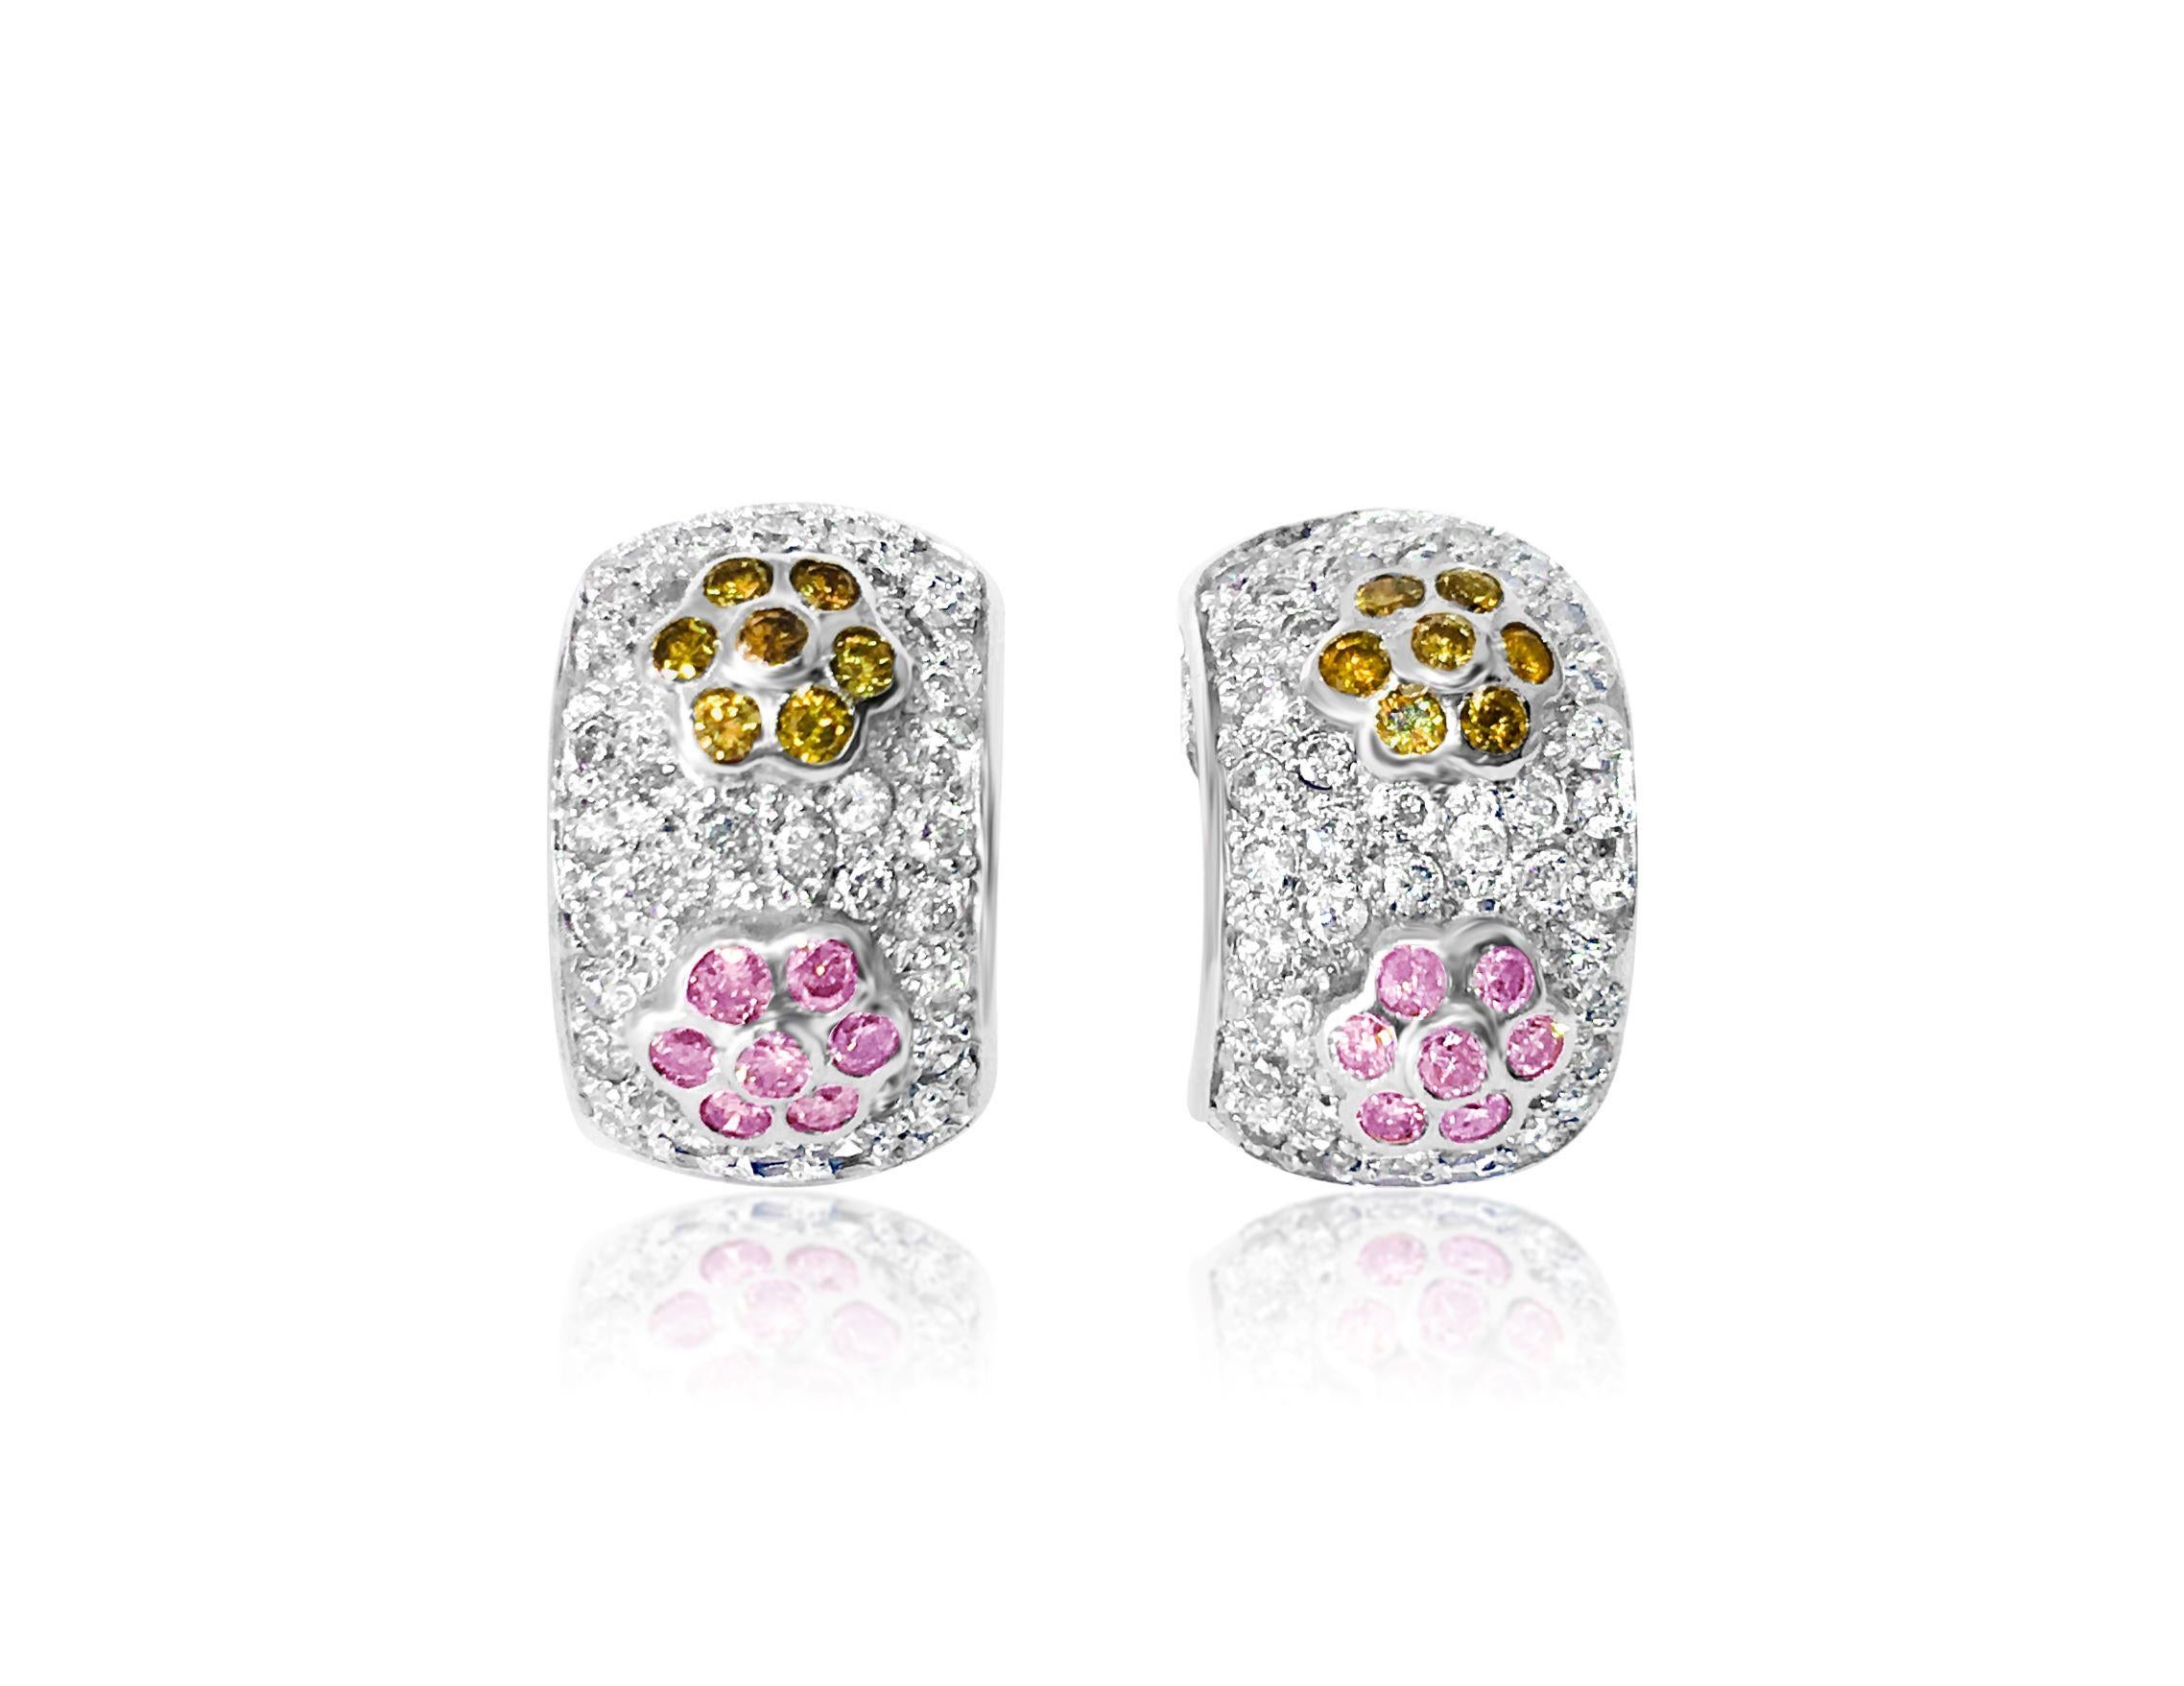 Brilliant Cut 2.0 CT white, pink & yellow diamonds in 14k earrings For Sale